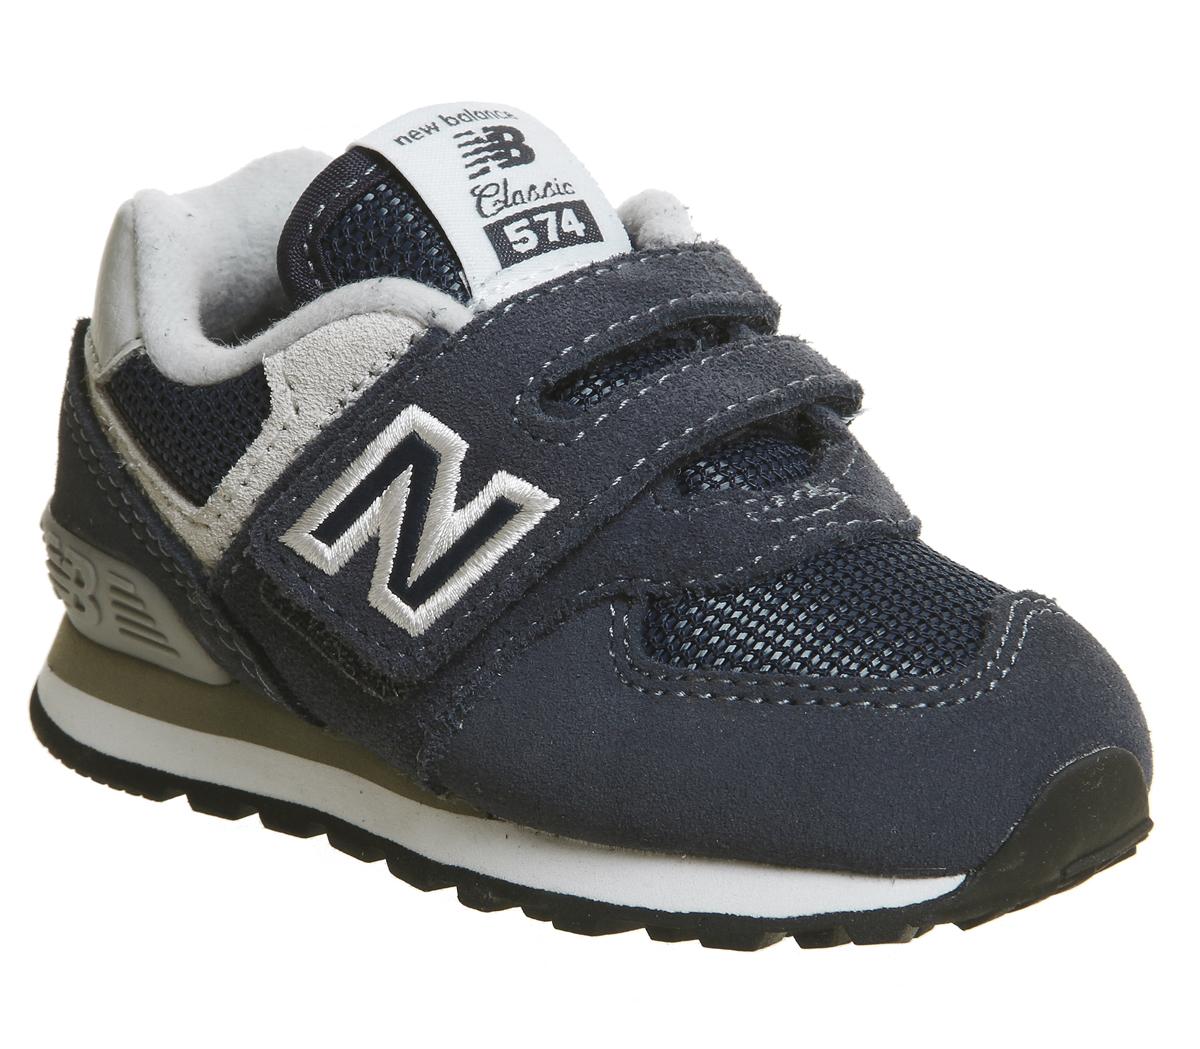 New Balance 574 Infant Navy - Kids Trainers